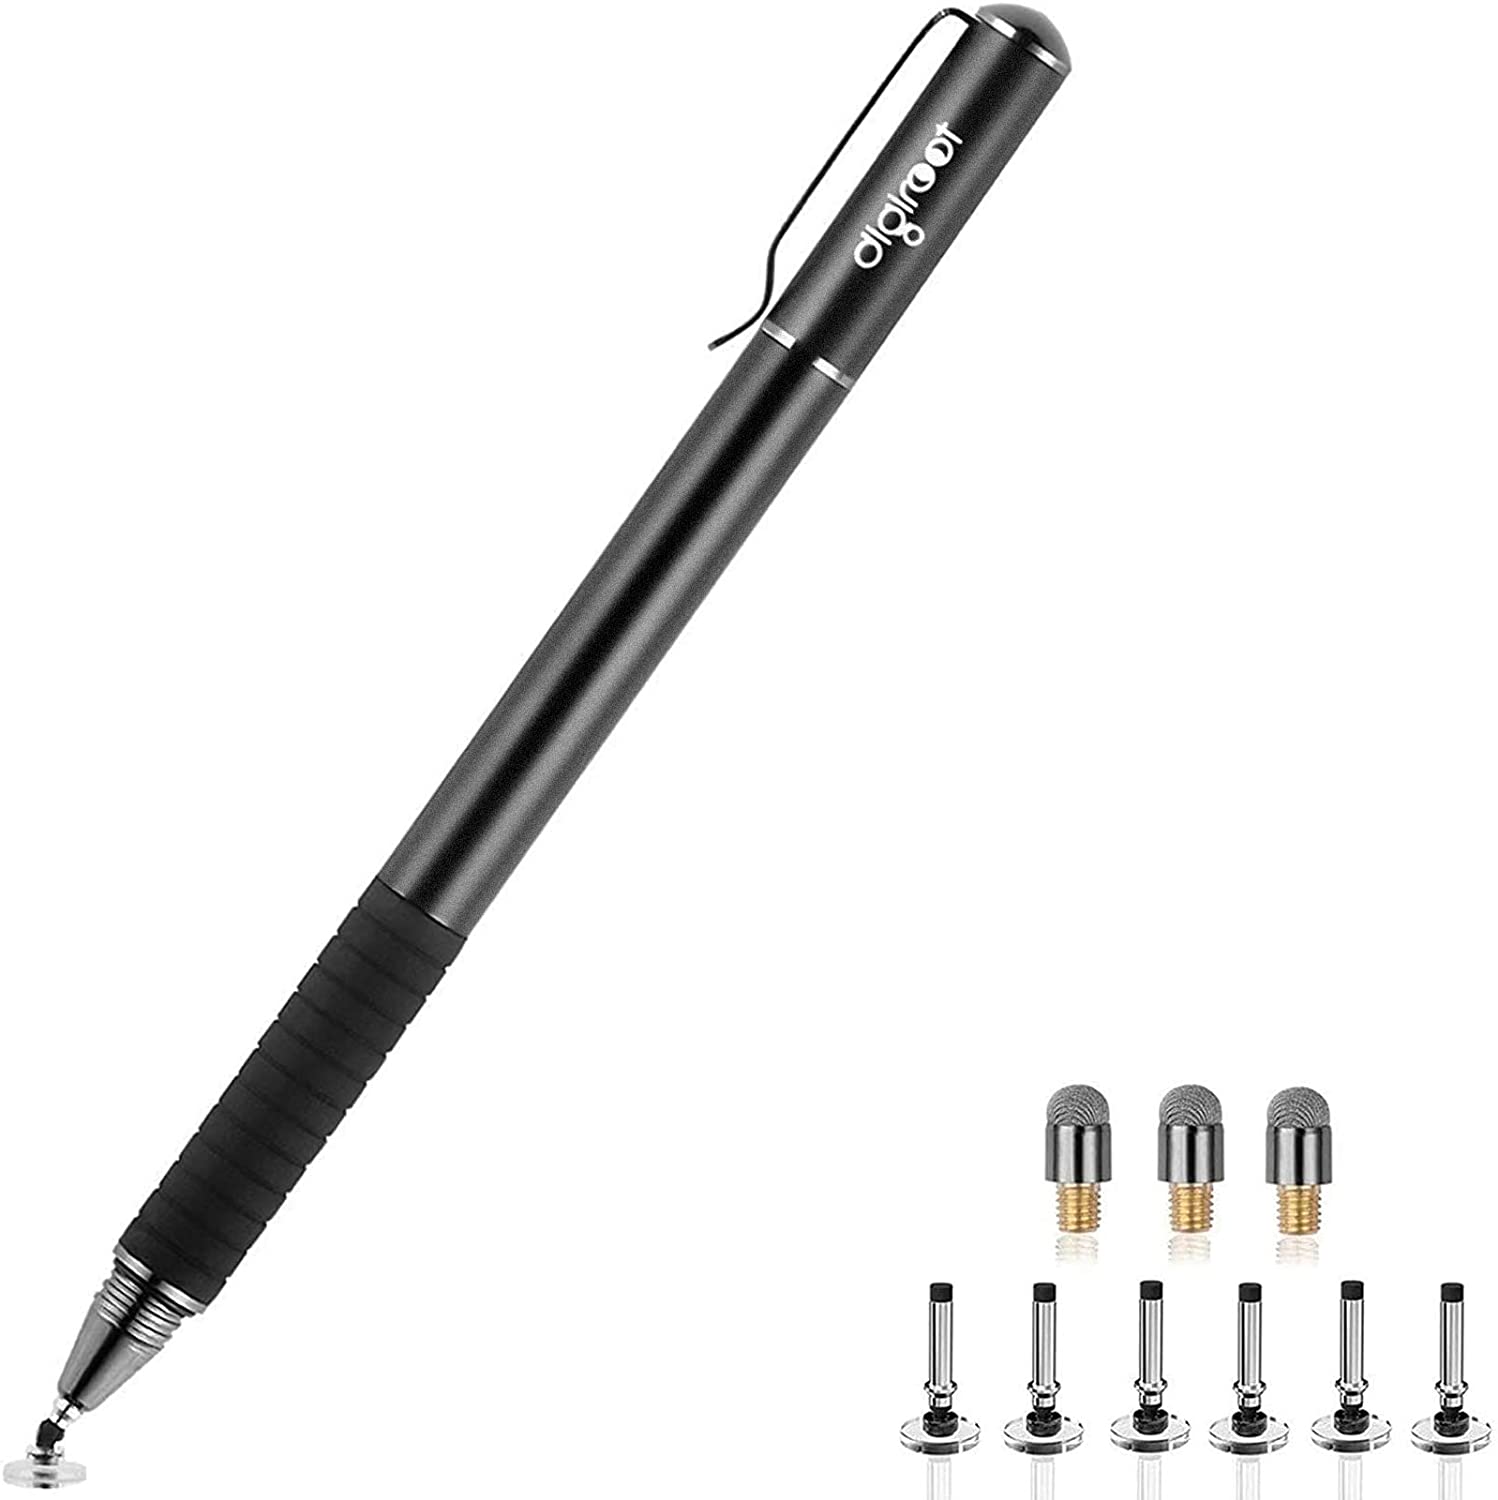 Digiroot 4-Pack Stylus Pens High Sensitivity & Precision Capacitive Stylus for iPhone/ iPad Pro/ Tablets/ Samsung/ Galaxy/ PC Stylus for Touch Screens 